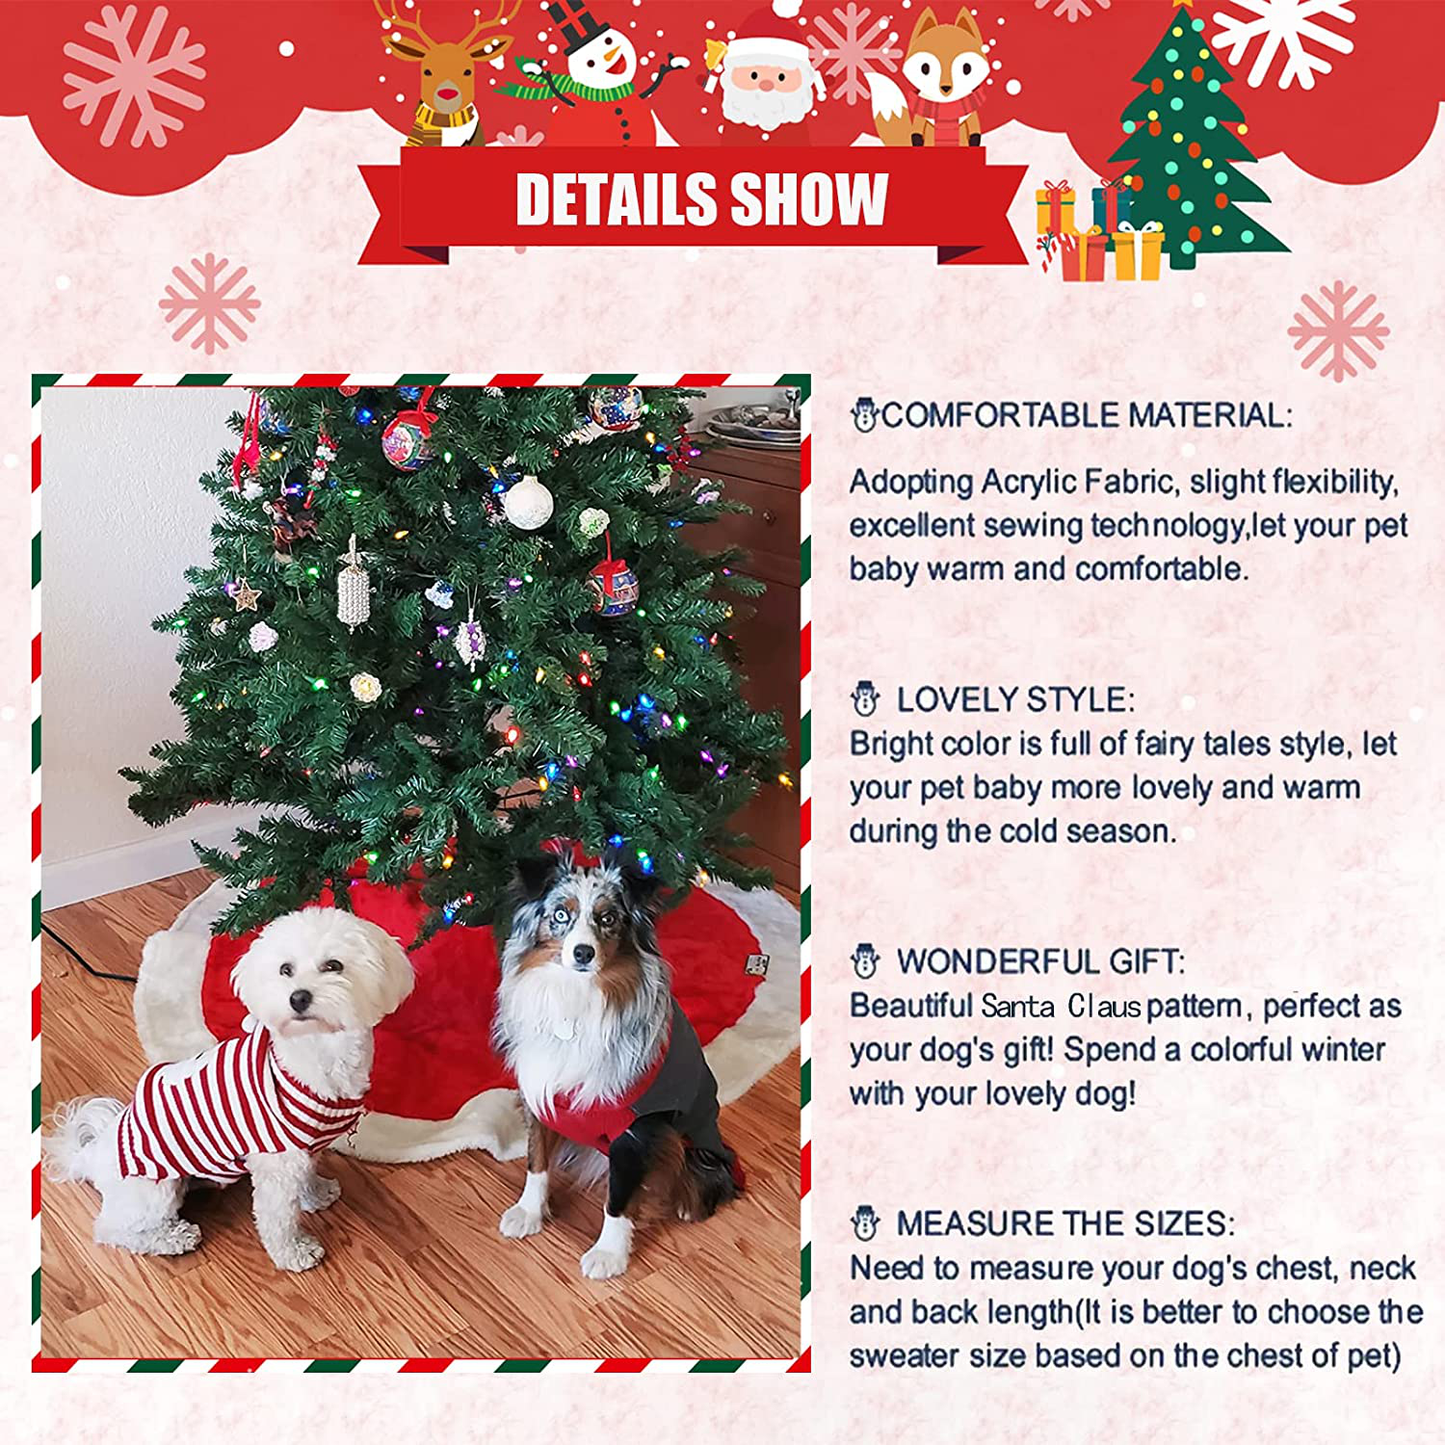 TENGZHI Dog Christmas Sweater Pet Costume XXS Cat Ugly Christmas Sweater Fall Puppy Jumper Dog Outfit for Small Medium Dogs Girl